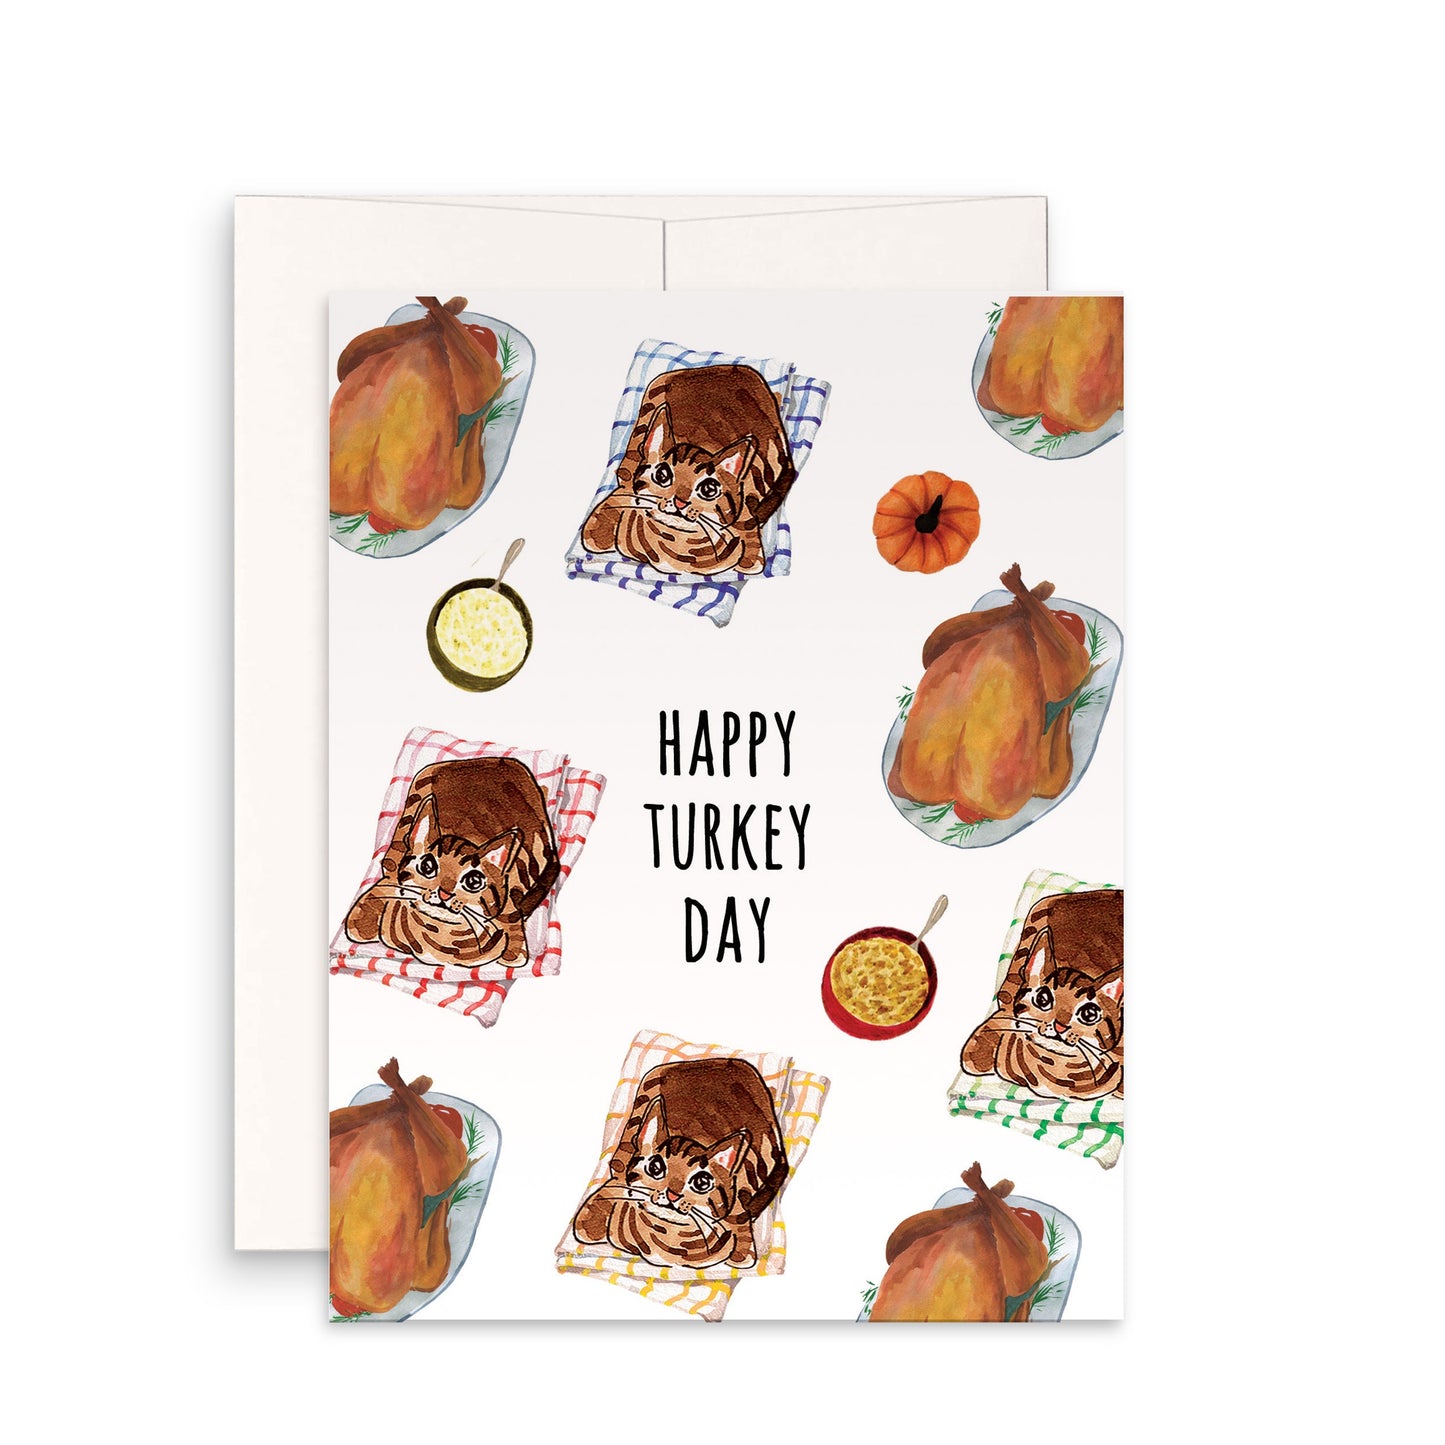 Funny Thanksgiving Cards Set - Turkey Dog Cat Holiday Cards For Friends- Handmade Greeting Cards By Liyana Studio